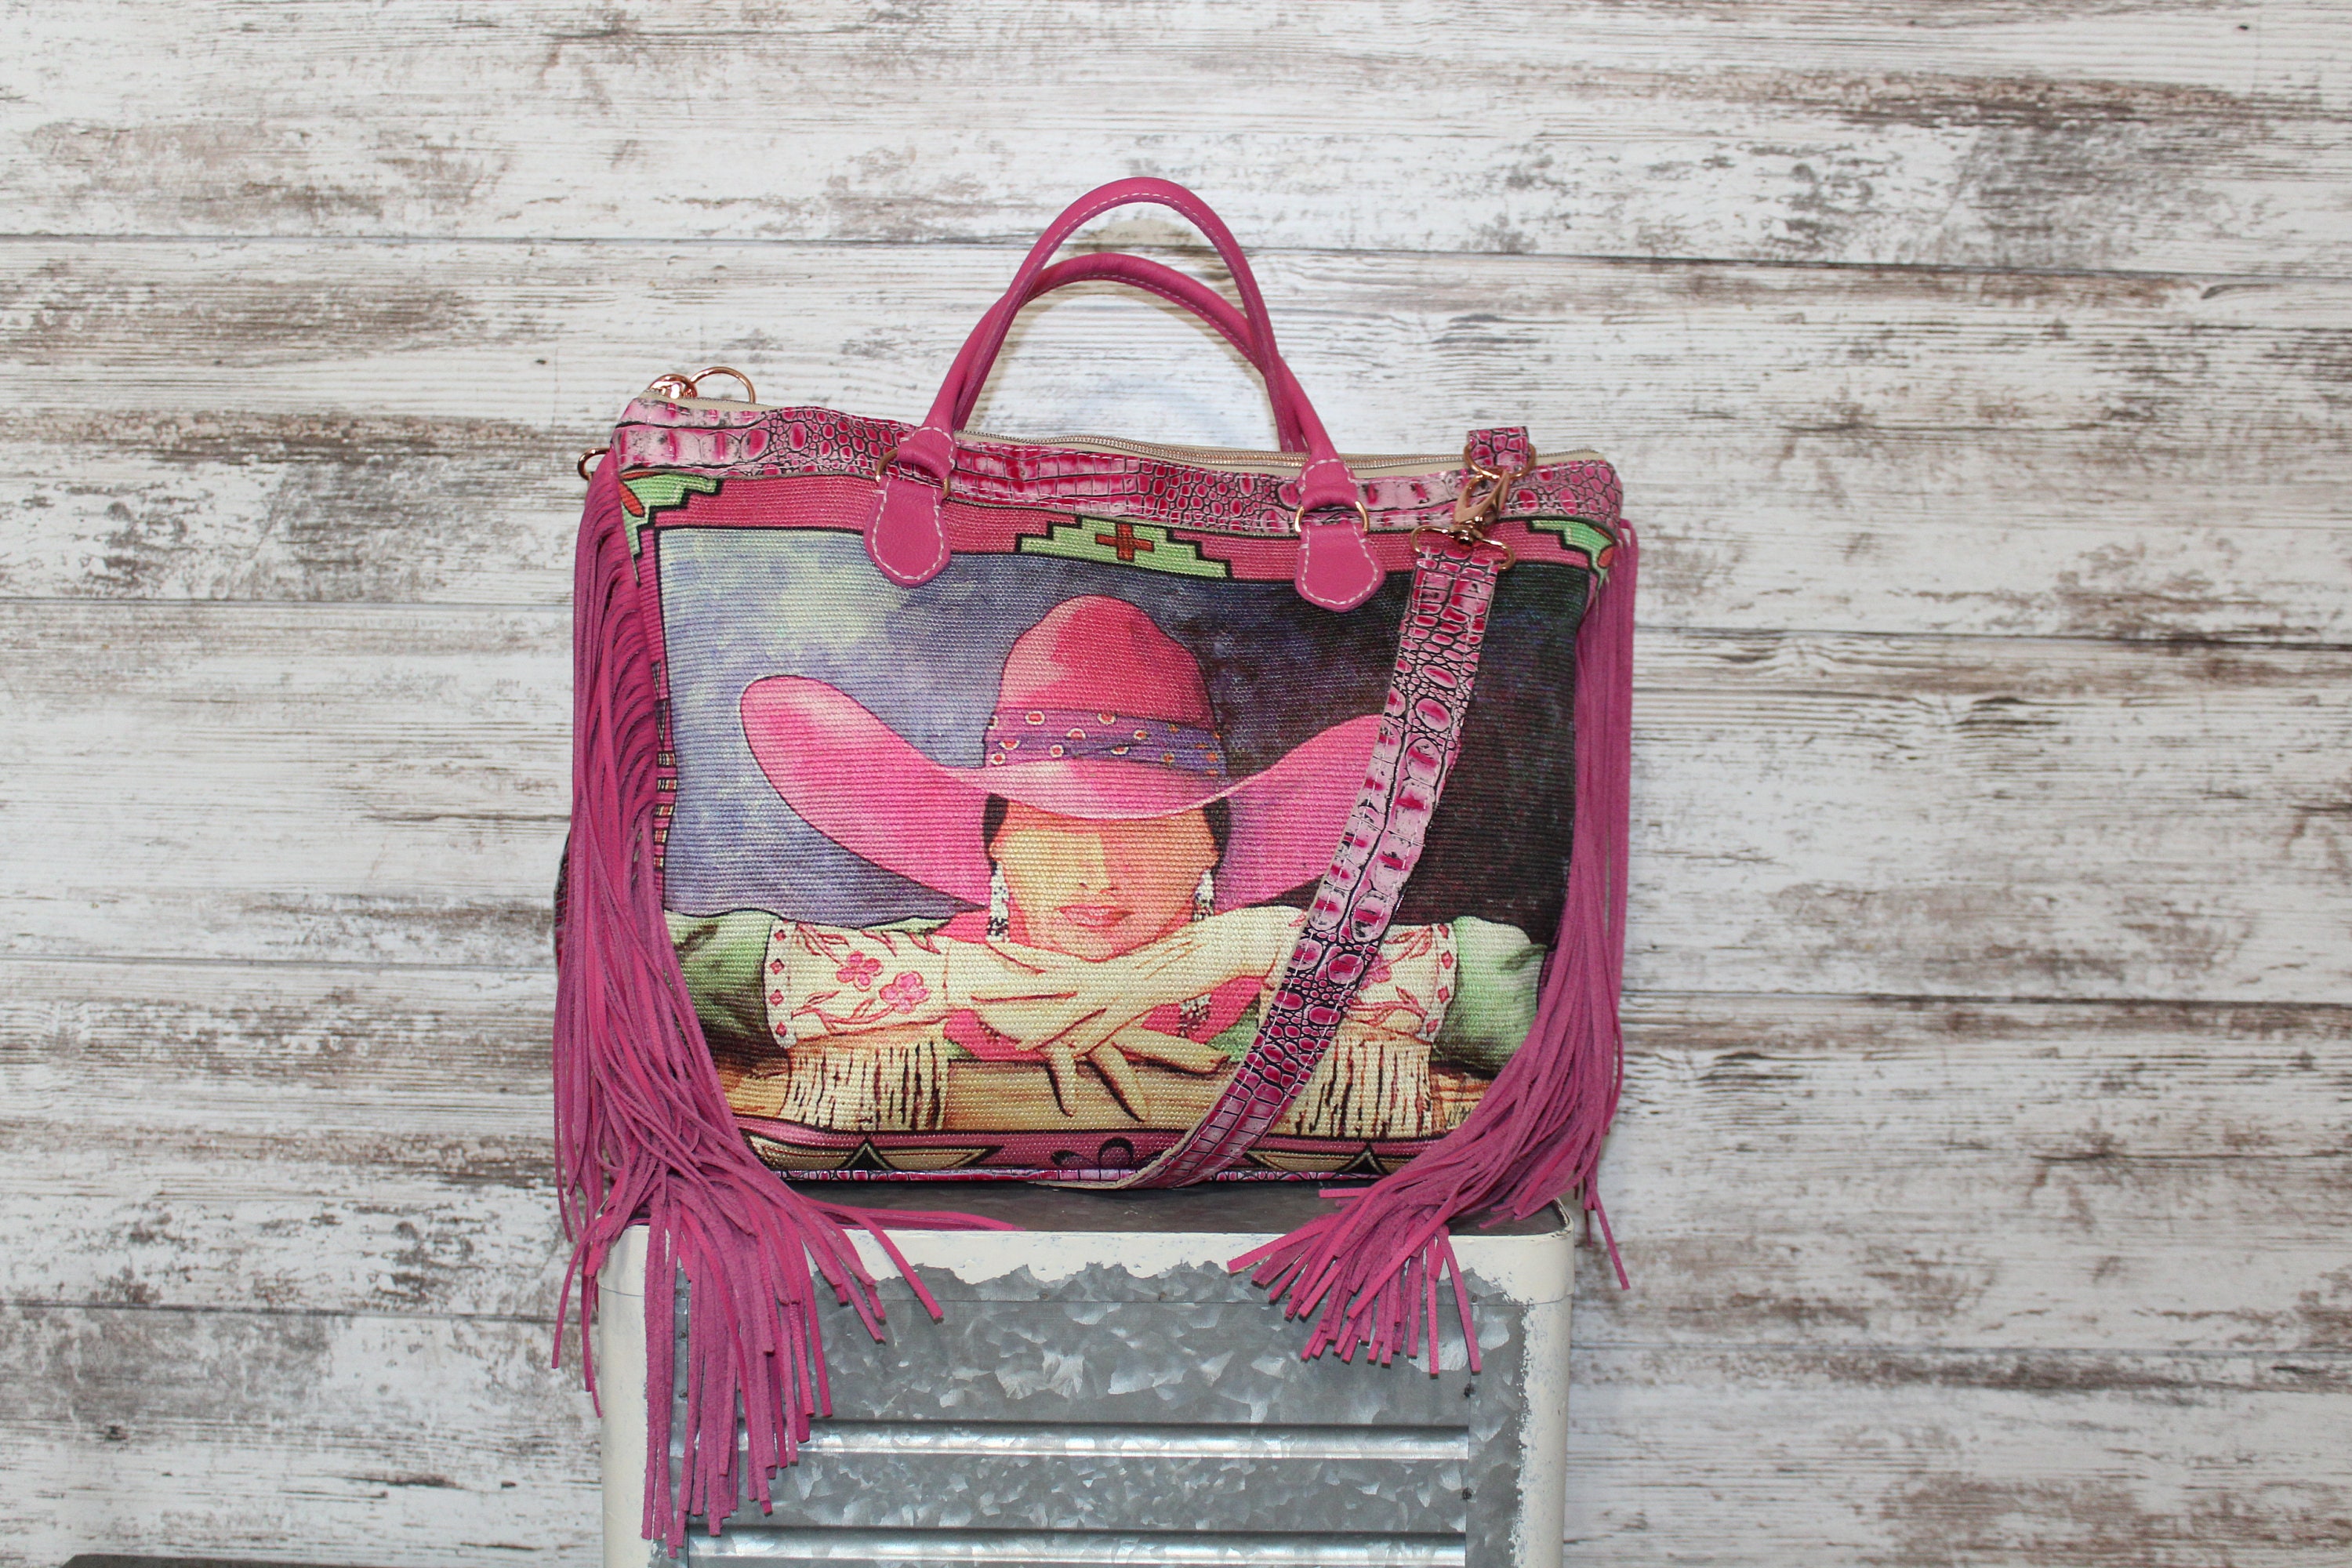 Cowgirl in Pink Handbag with Crocodile Embossed Leather Conceal Carry